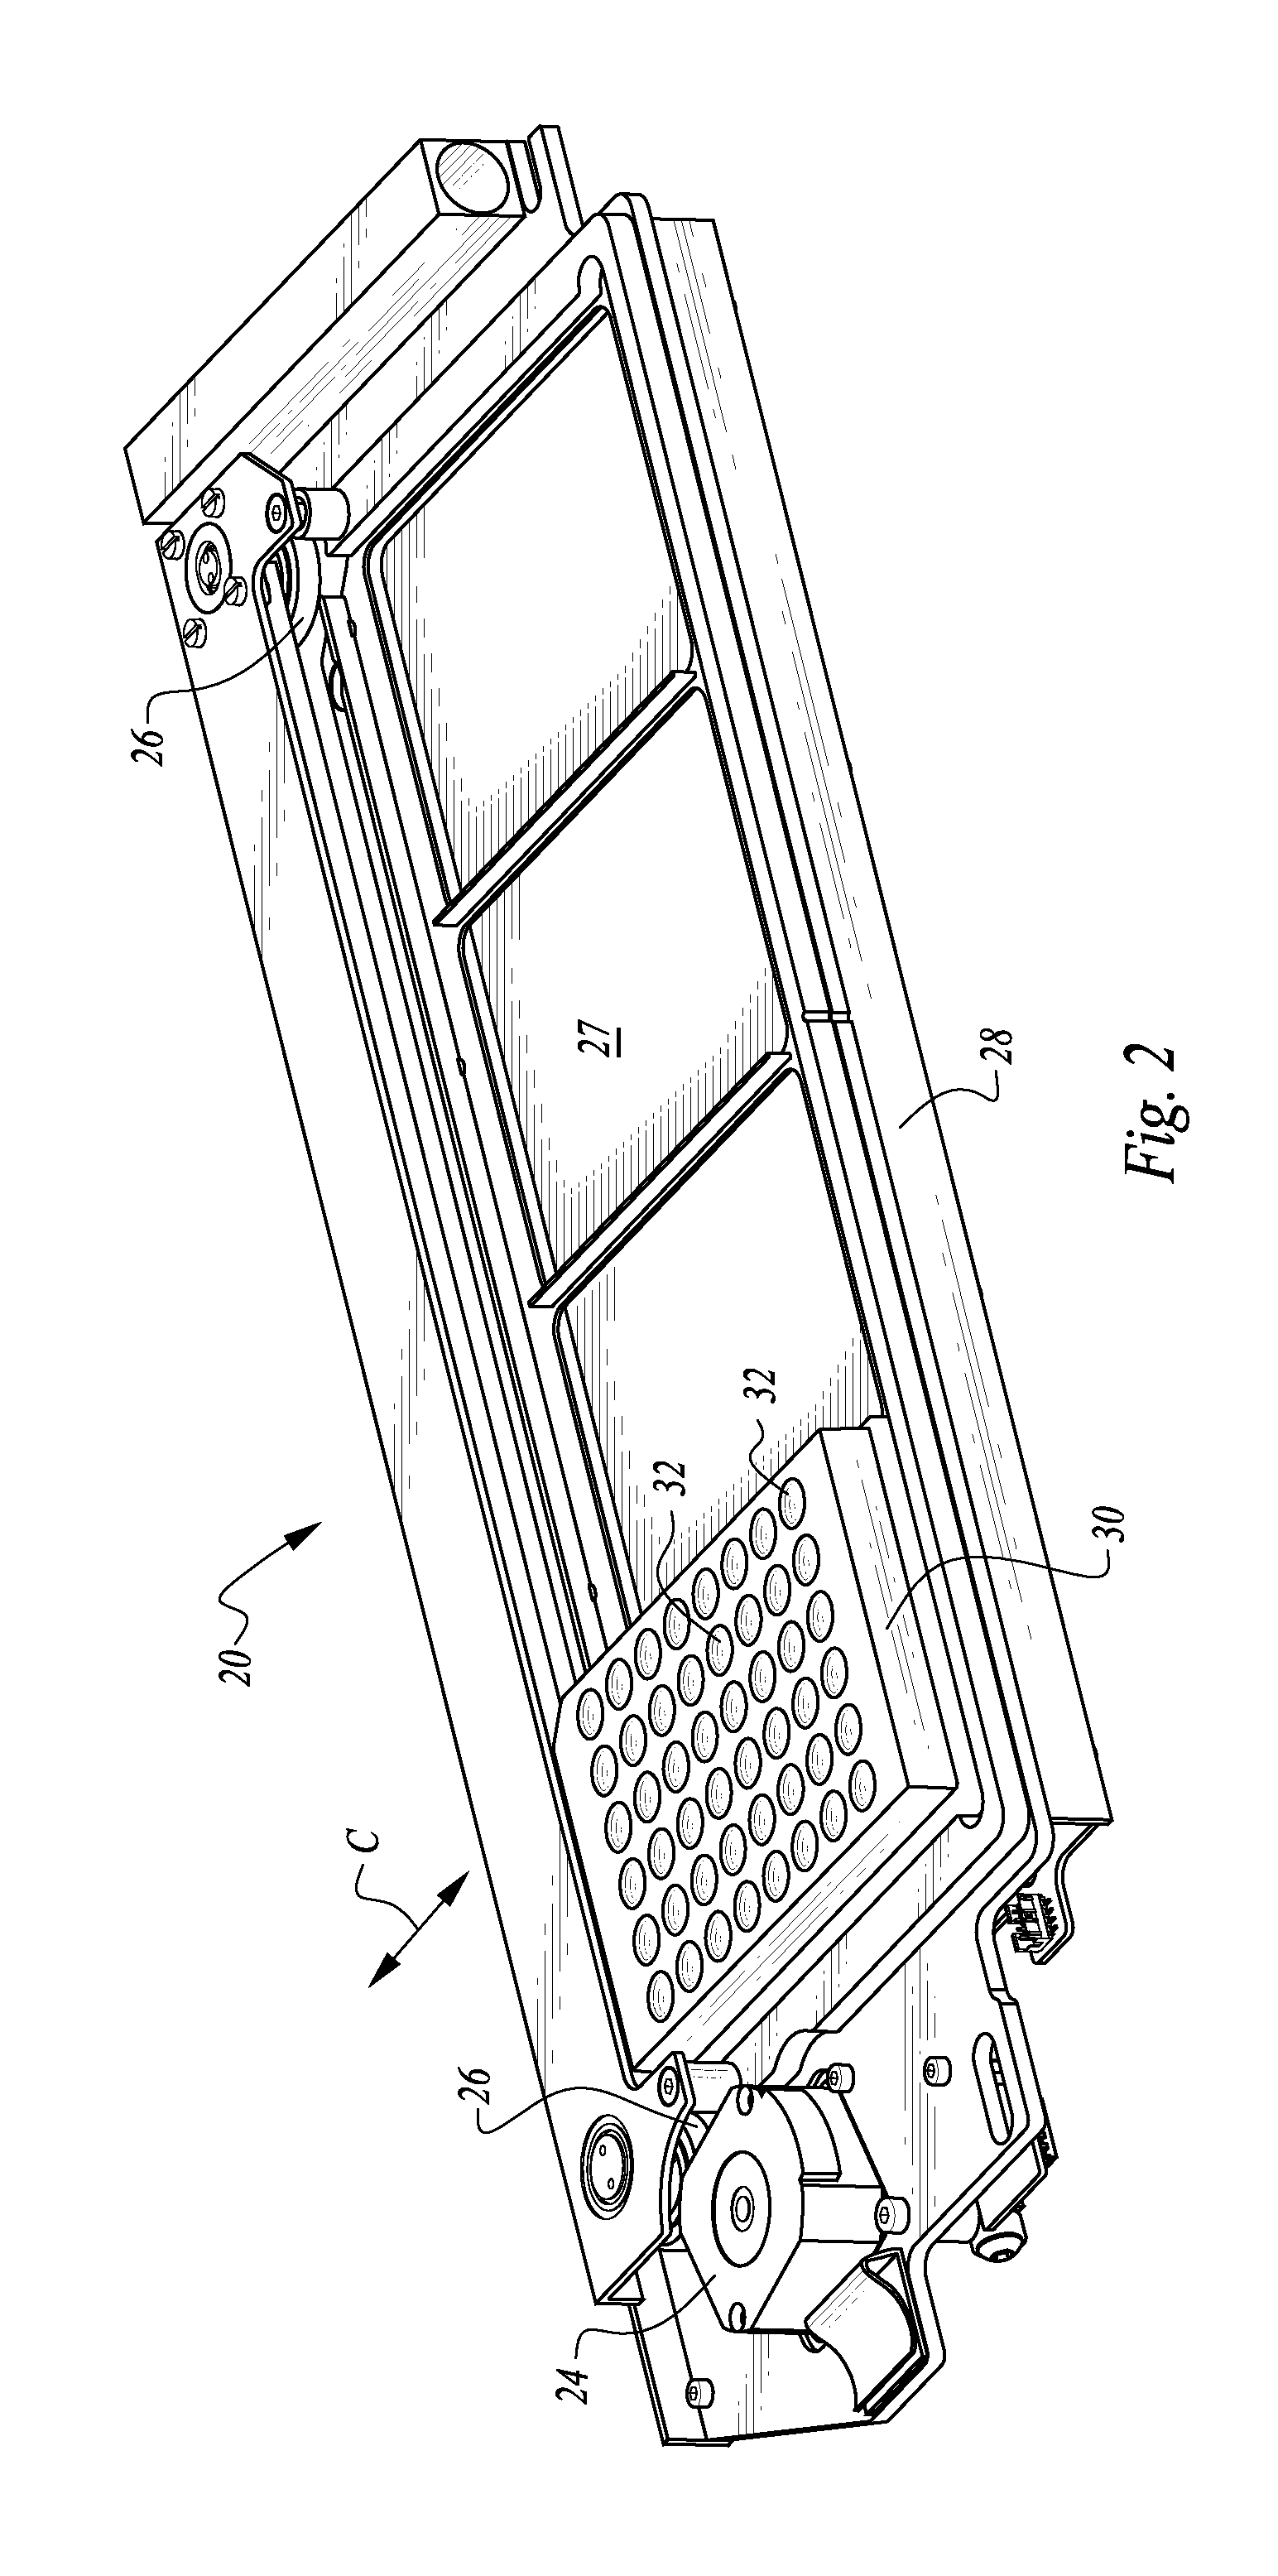 Process and machine for automated agglutination assays